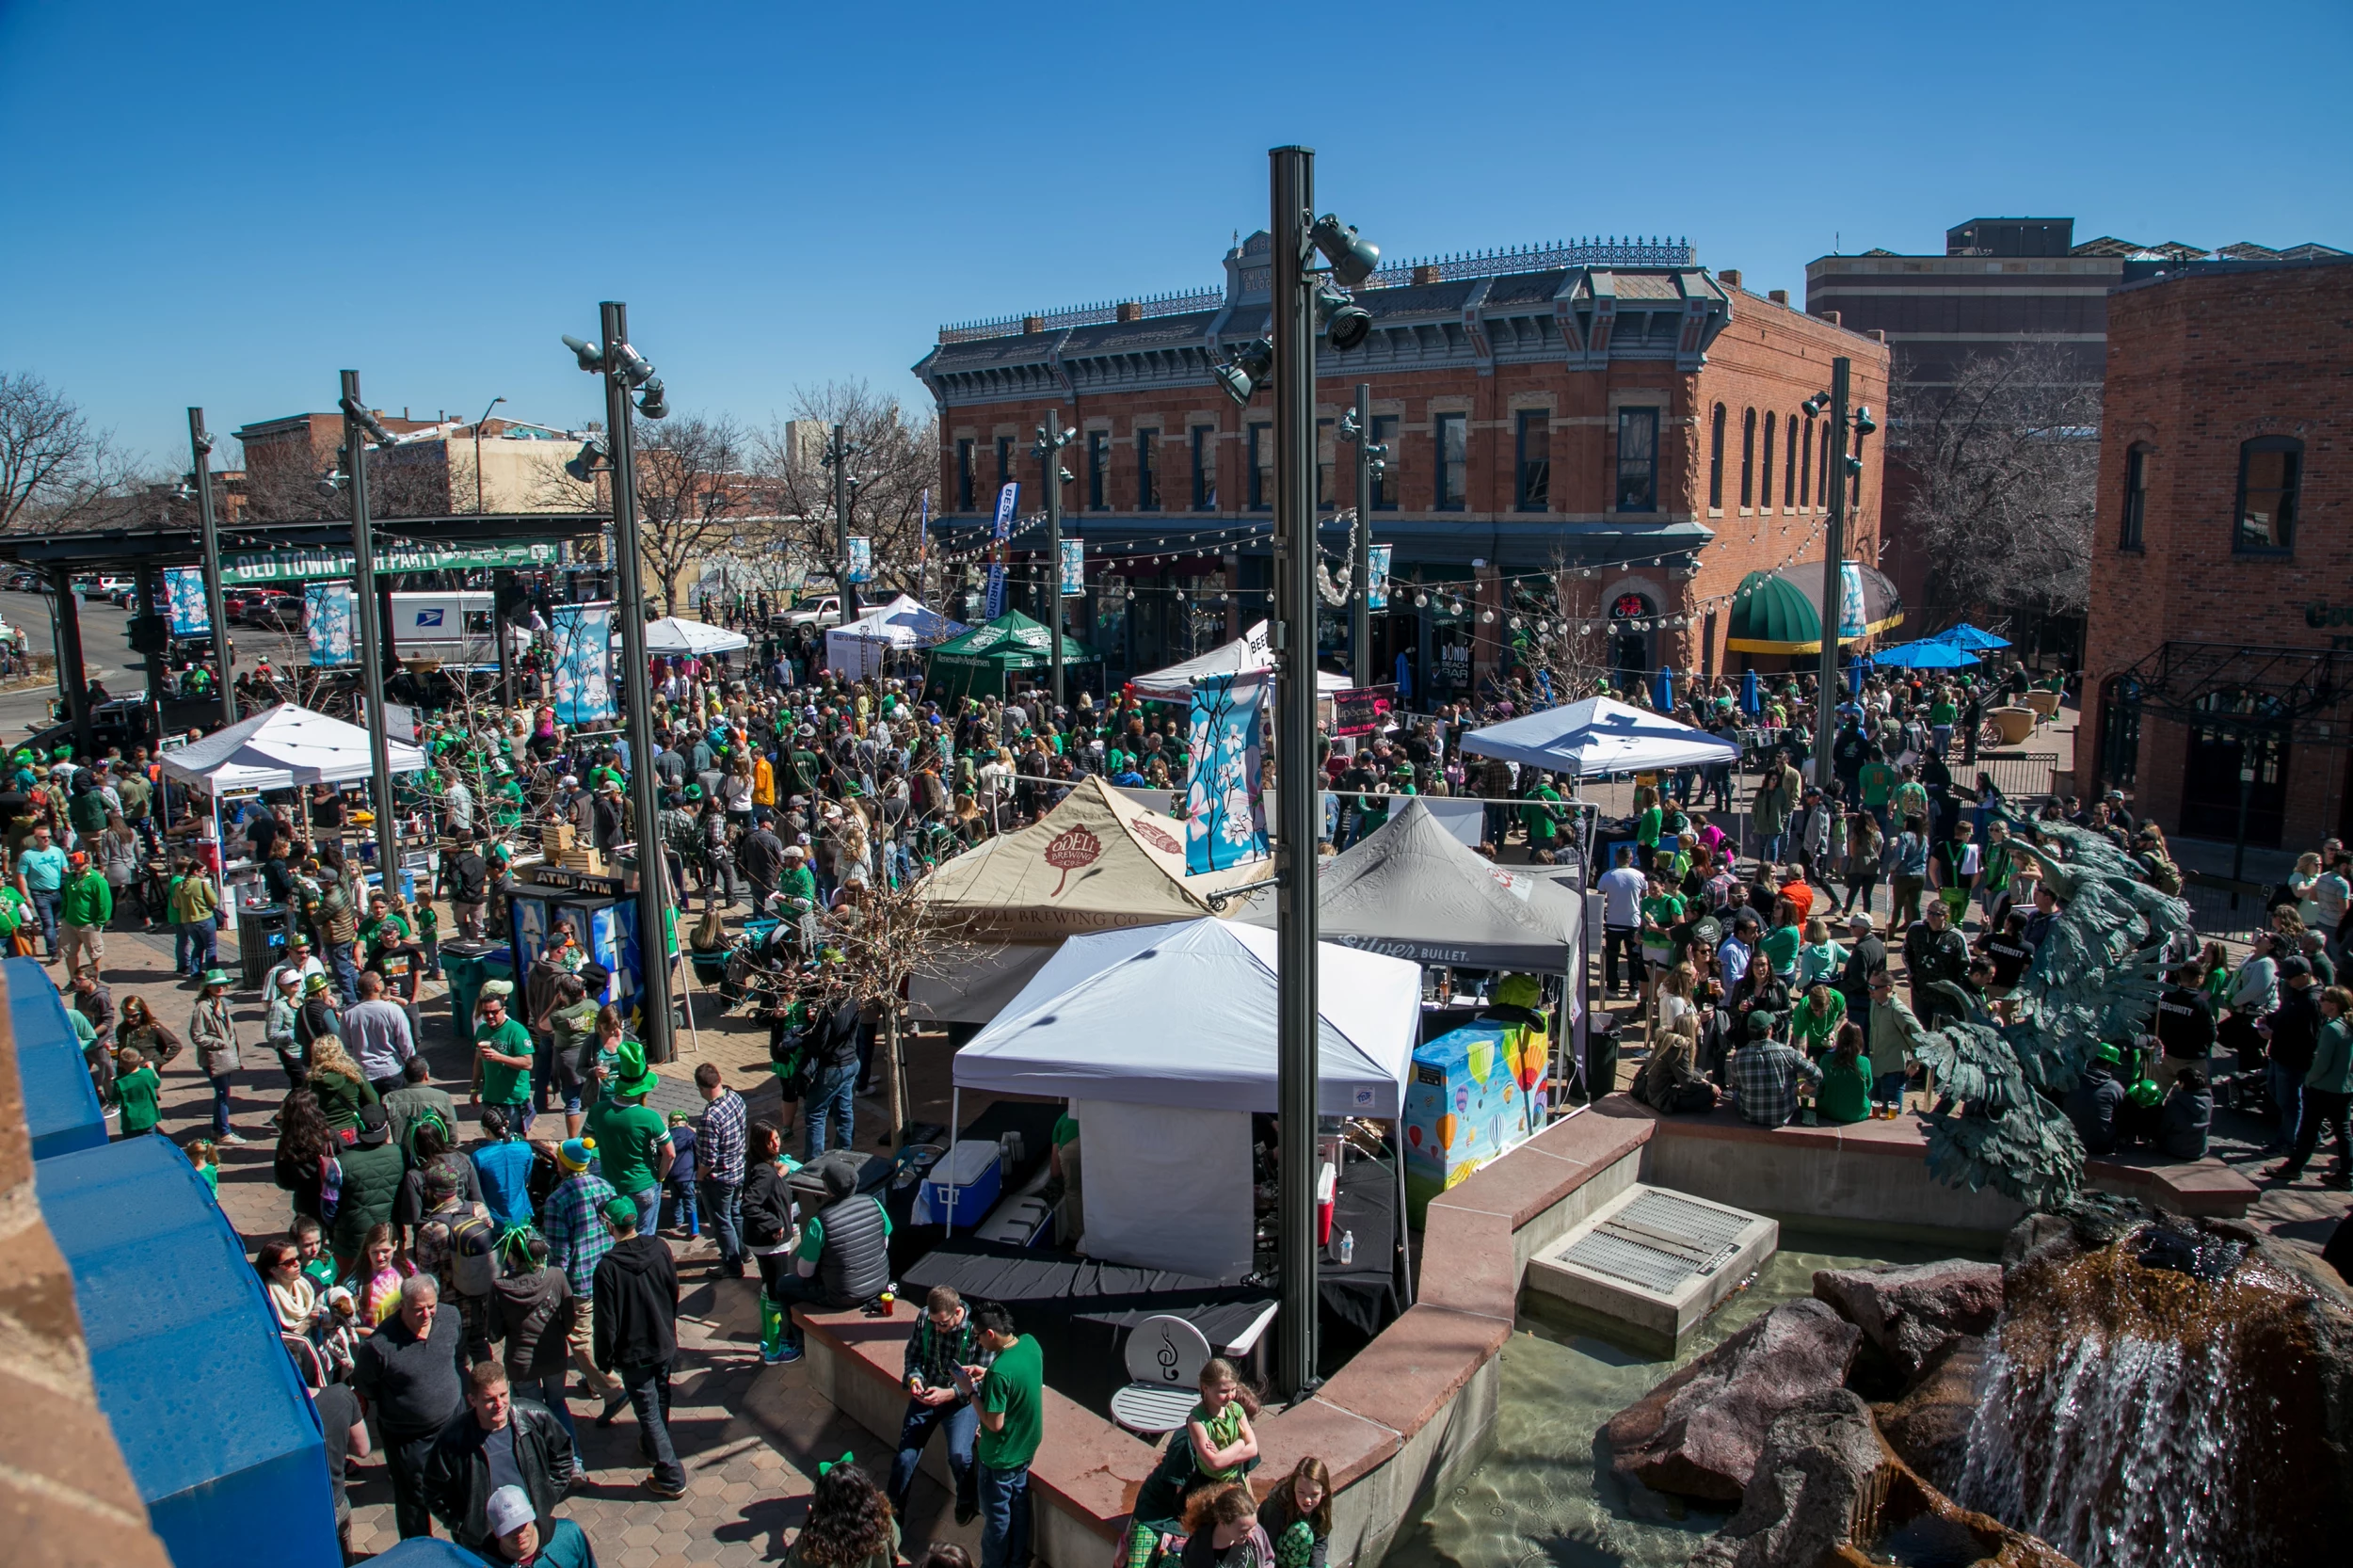 AnheuserBusch Fort Collins Brewery Green for St. Patrick’s Day